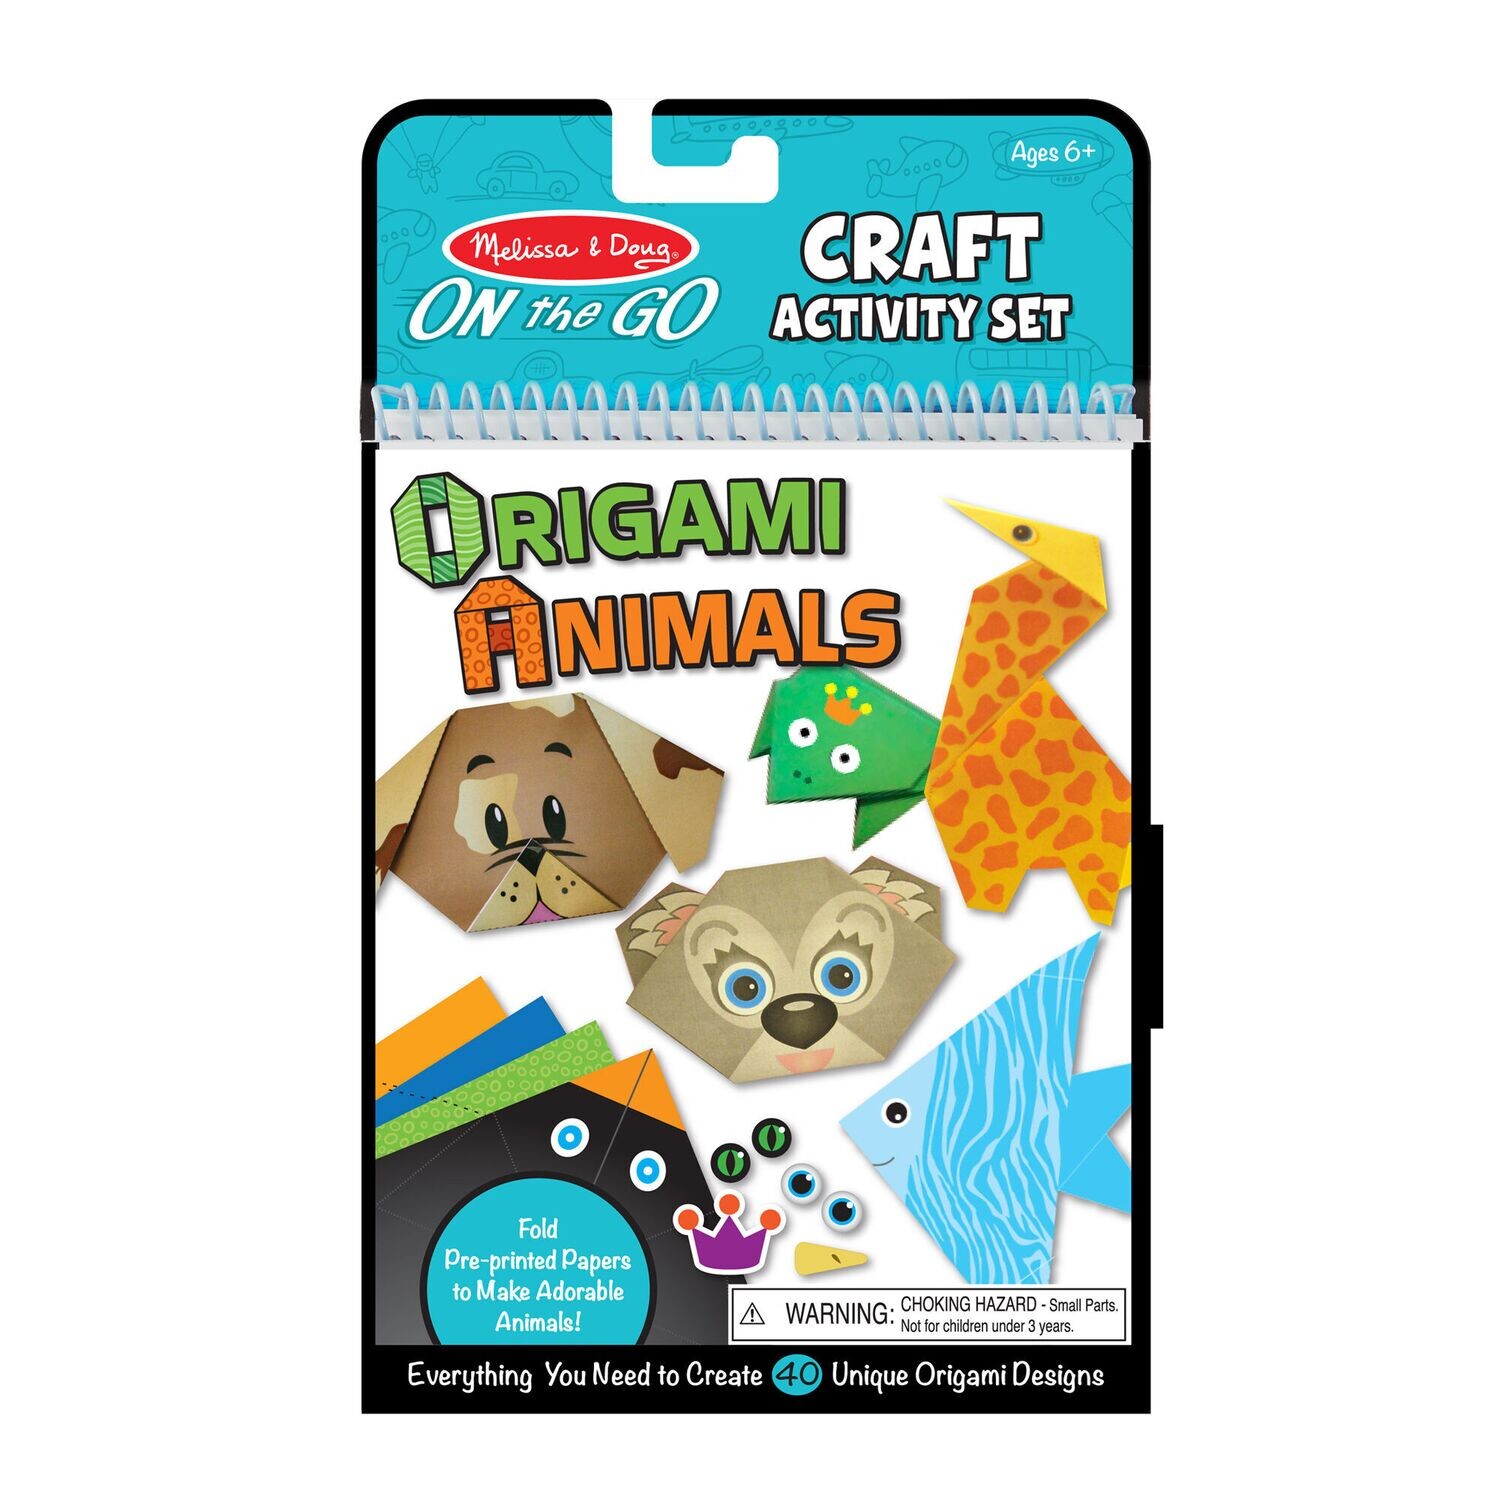 NL002 On the Go Crafts & Activities